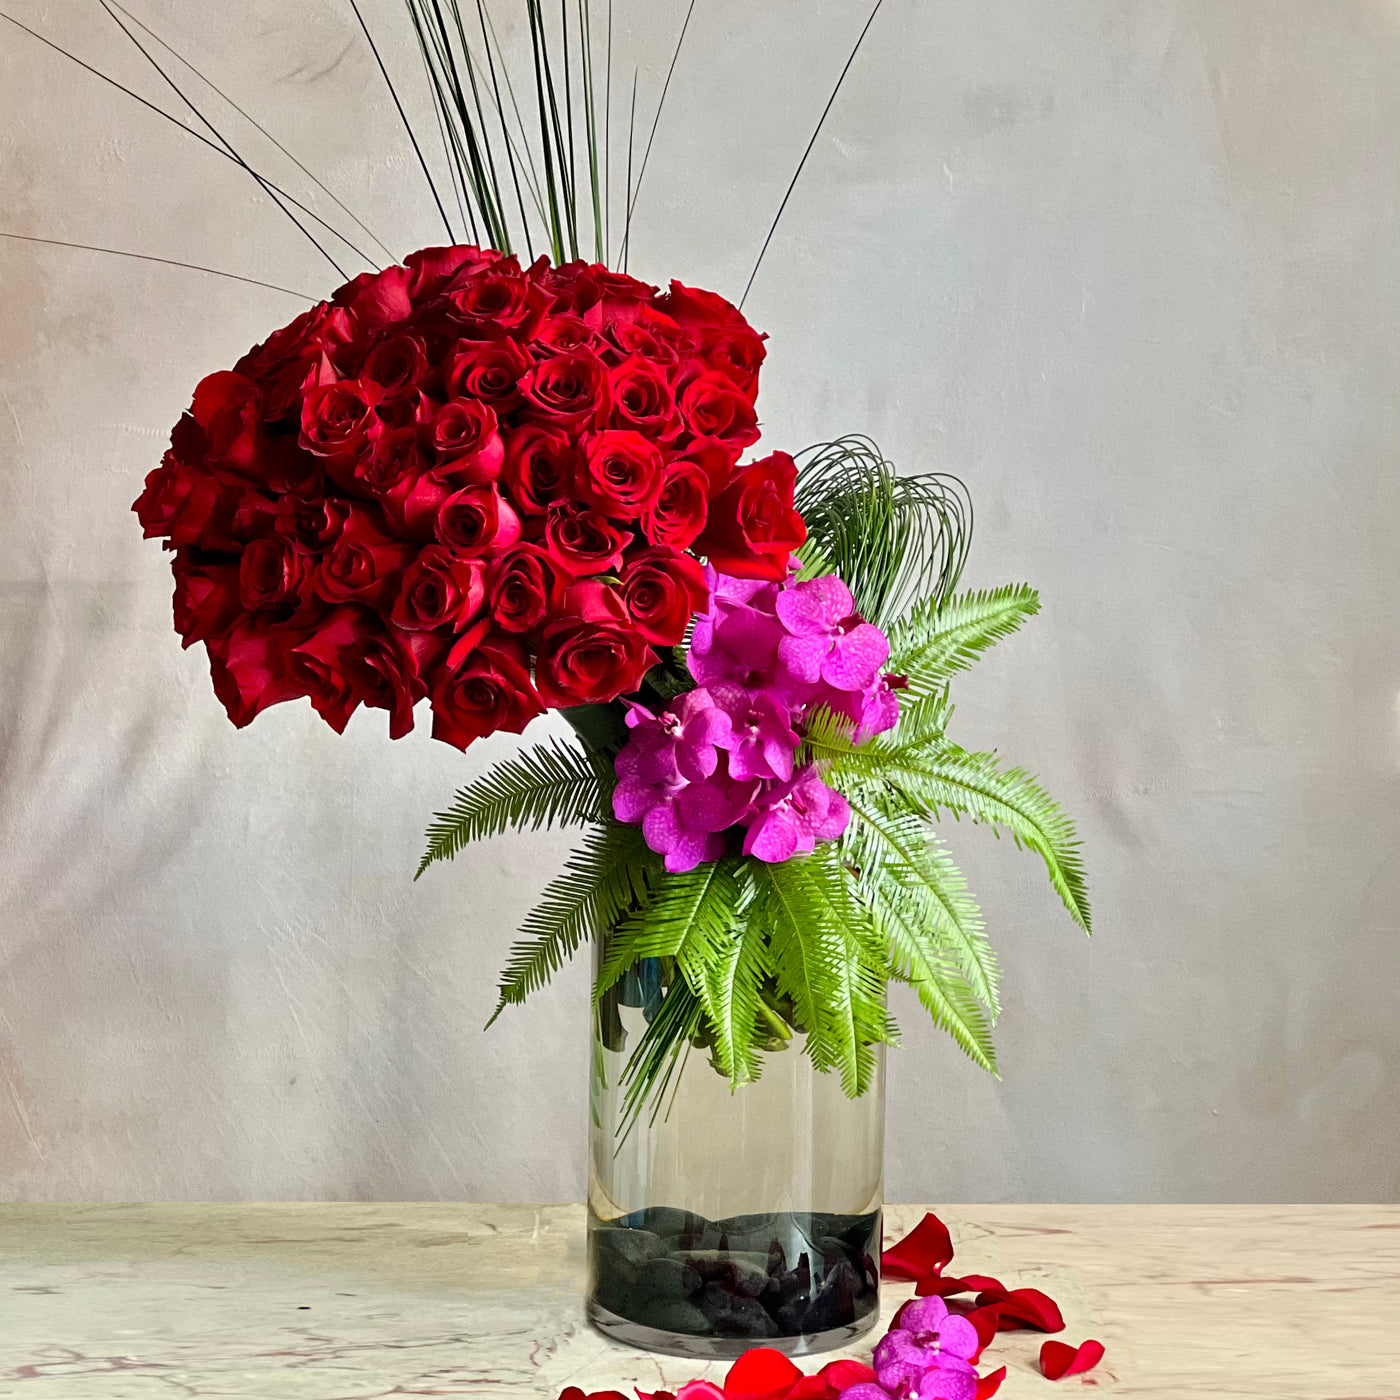 Valentines Day Delivery, Valentines Day Flowers, Same Day delivery, Red Roses, Beverly Hills Florist, Orchids, Love and Romance, Birthday Flowers, Love and Romance Flowers, Just Because Flowers